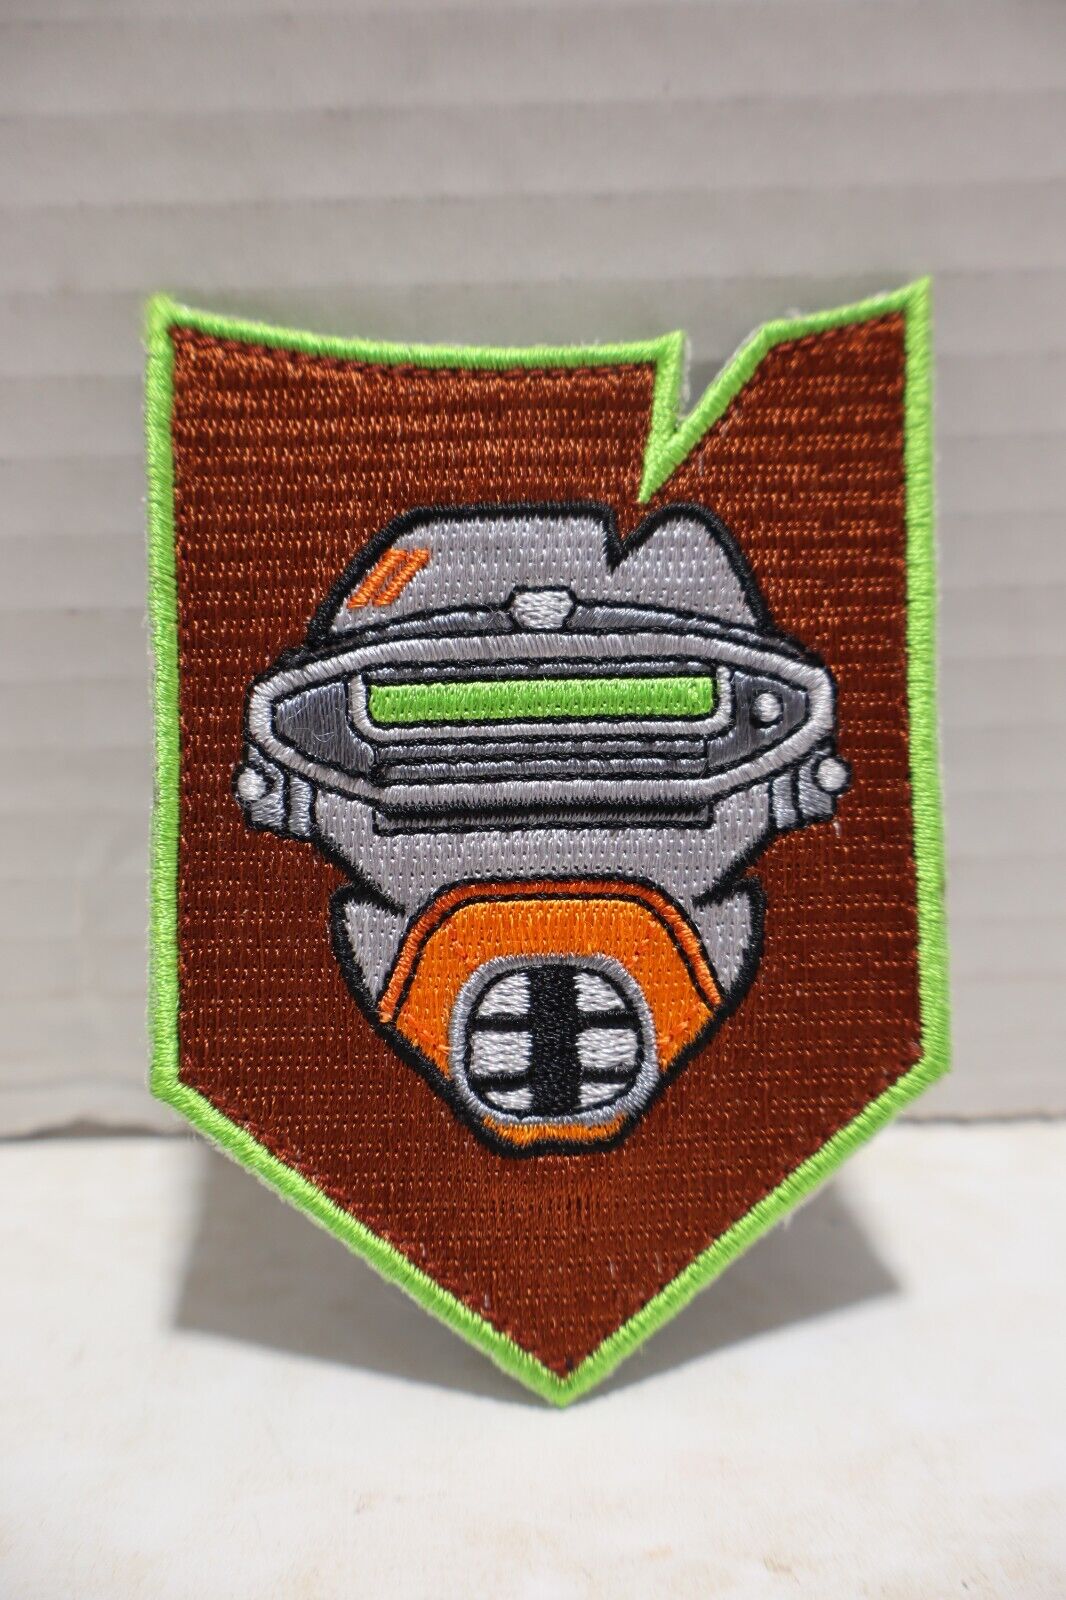 ITS Tactical Star Wars Princess Leia Boushh Disguise Bounty Hunter Morale Patch